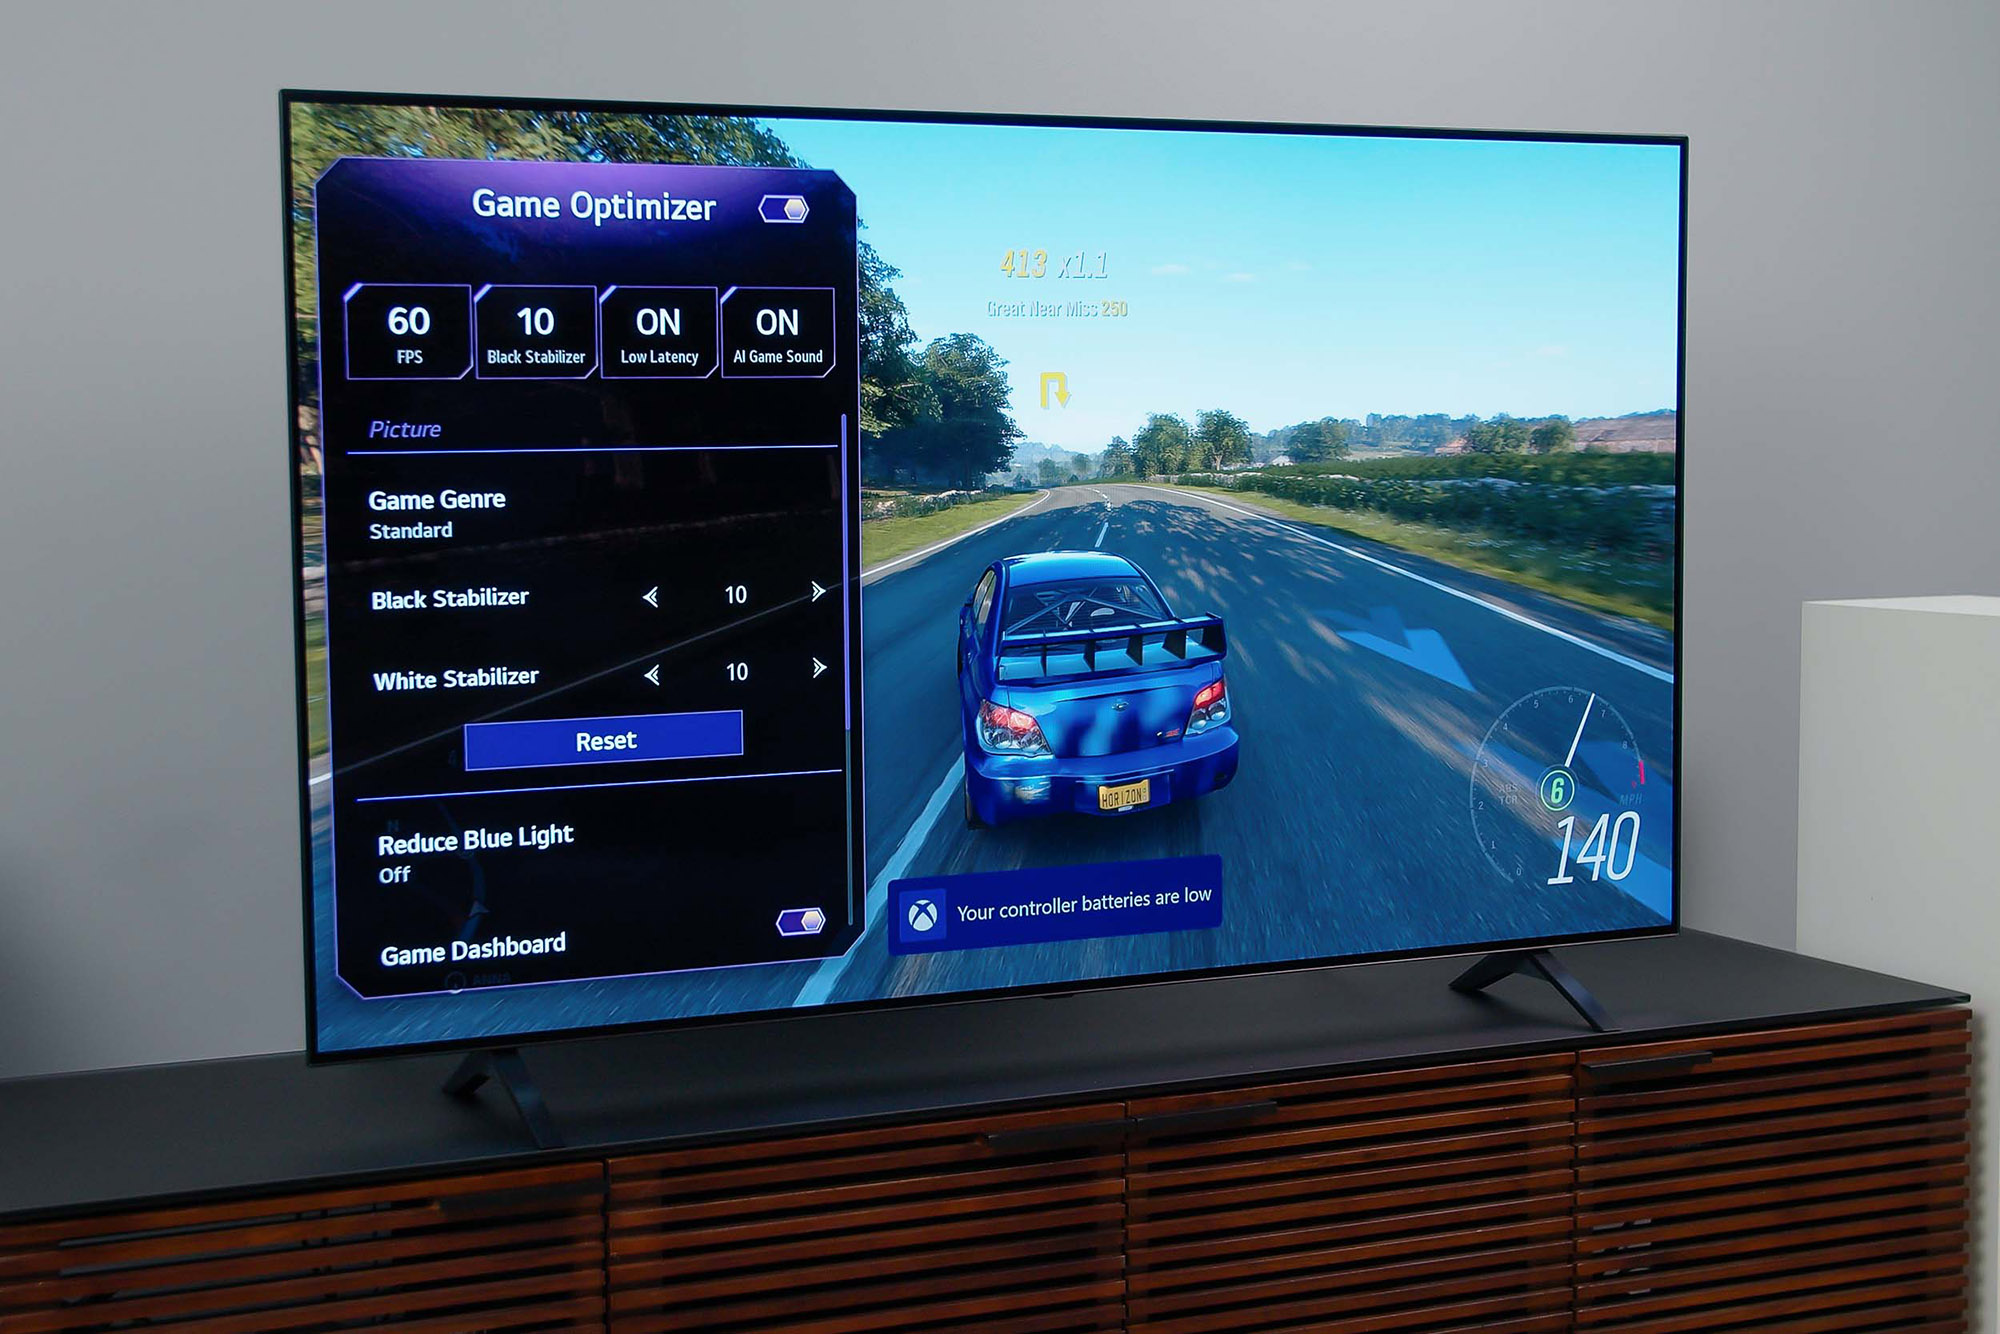 Game optimizer settings on the LG A1 OLED 4K HDR TV.